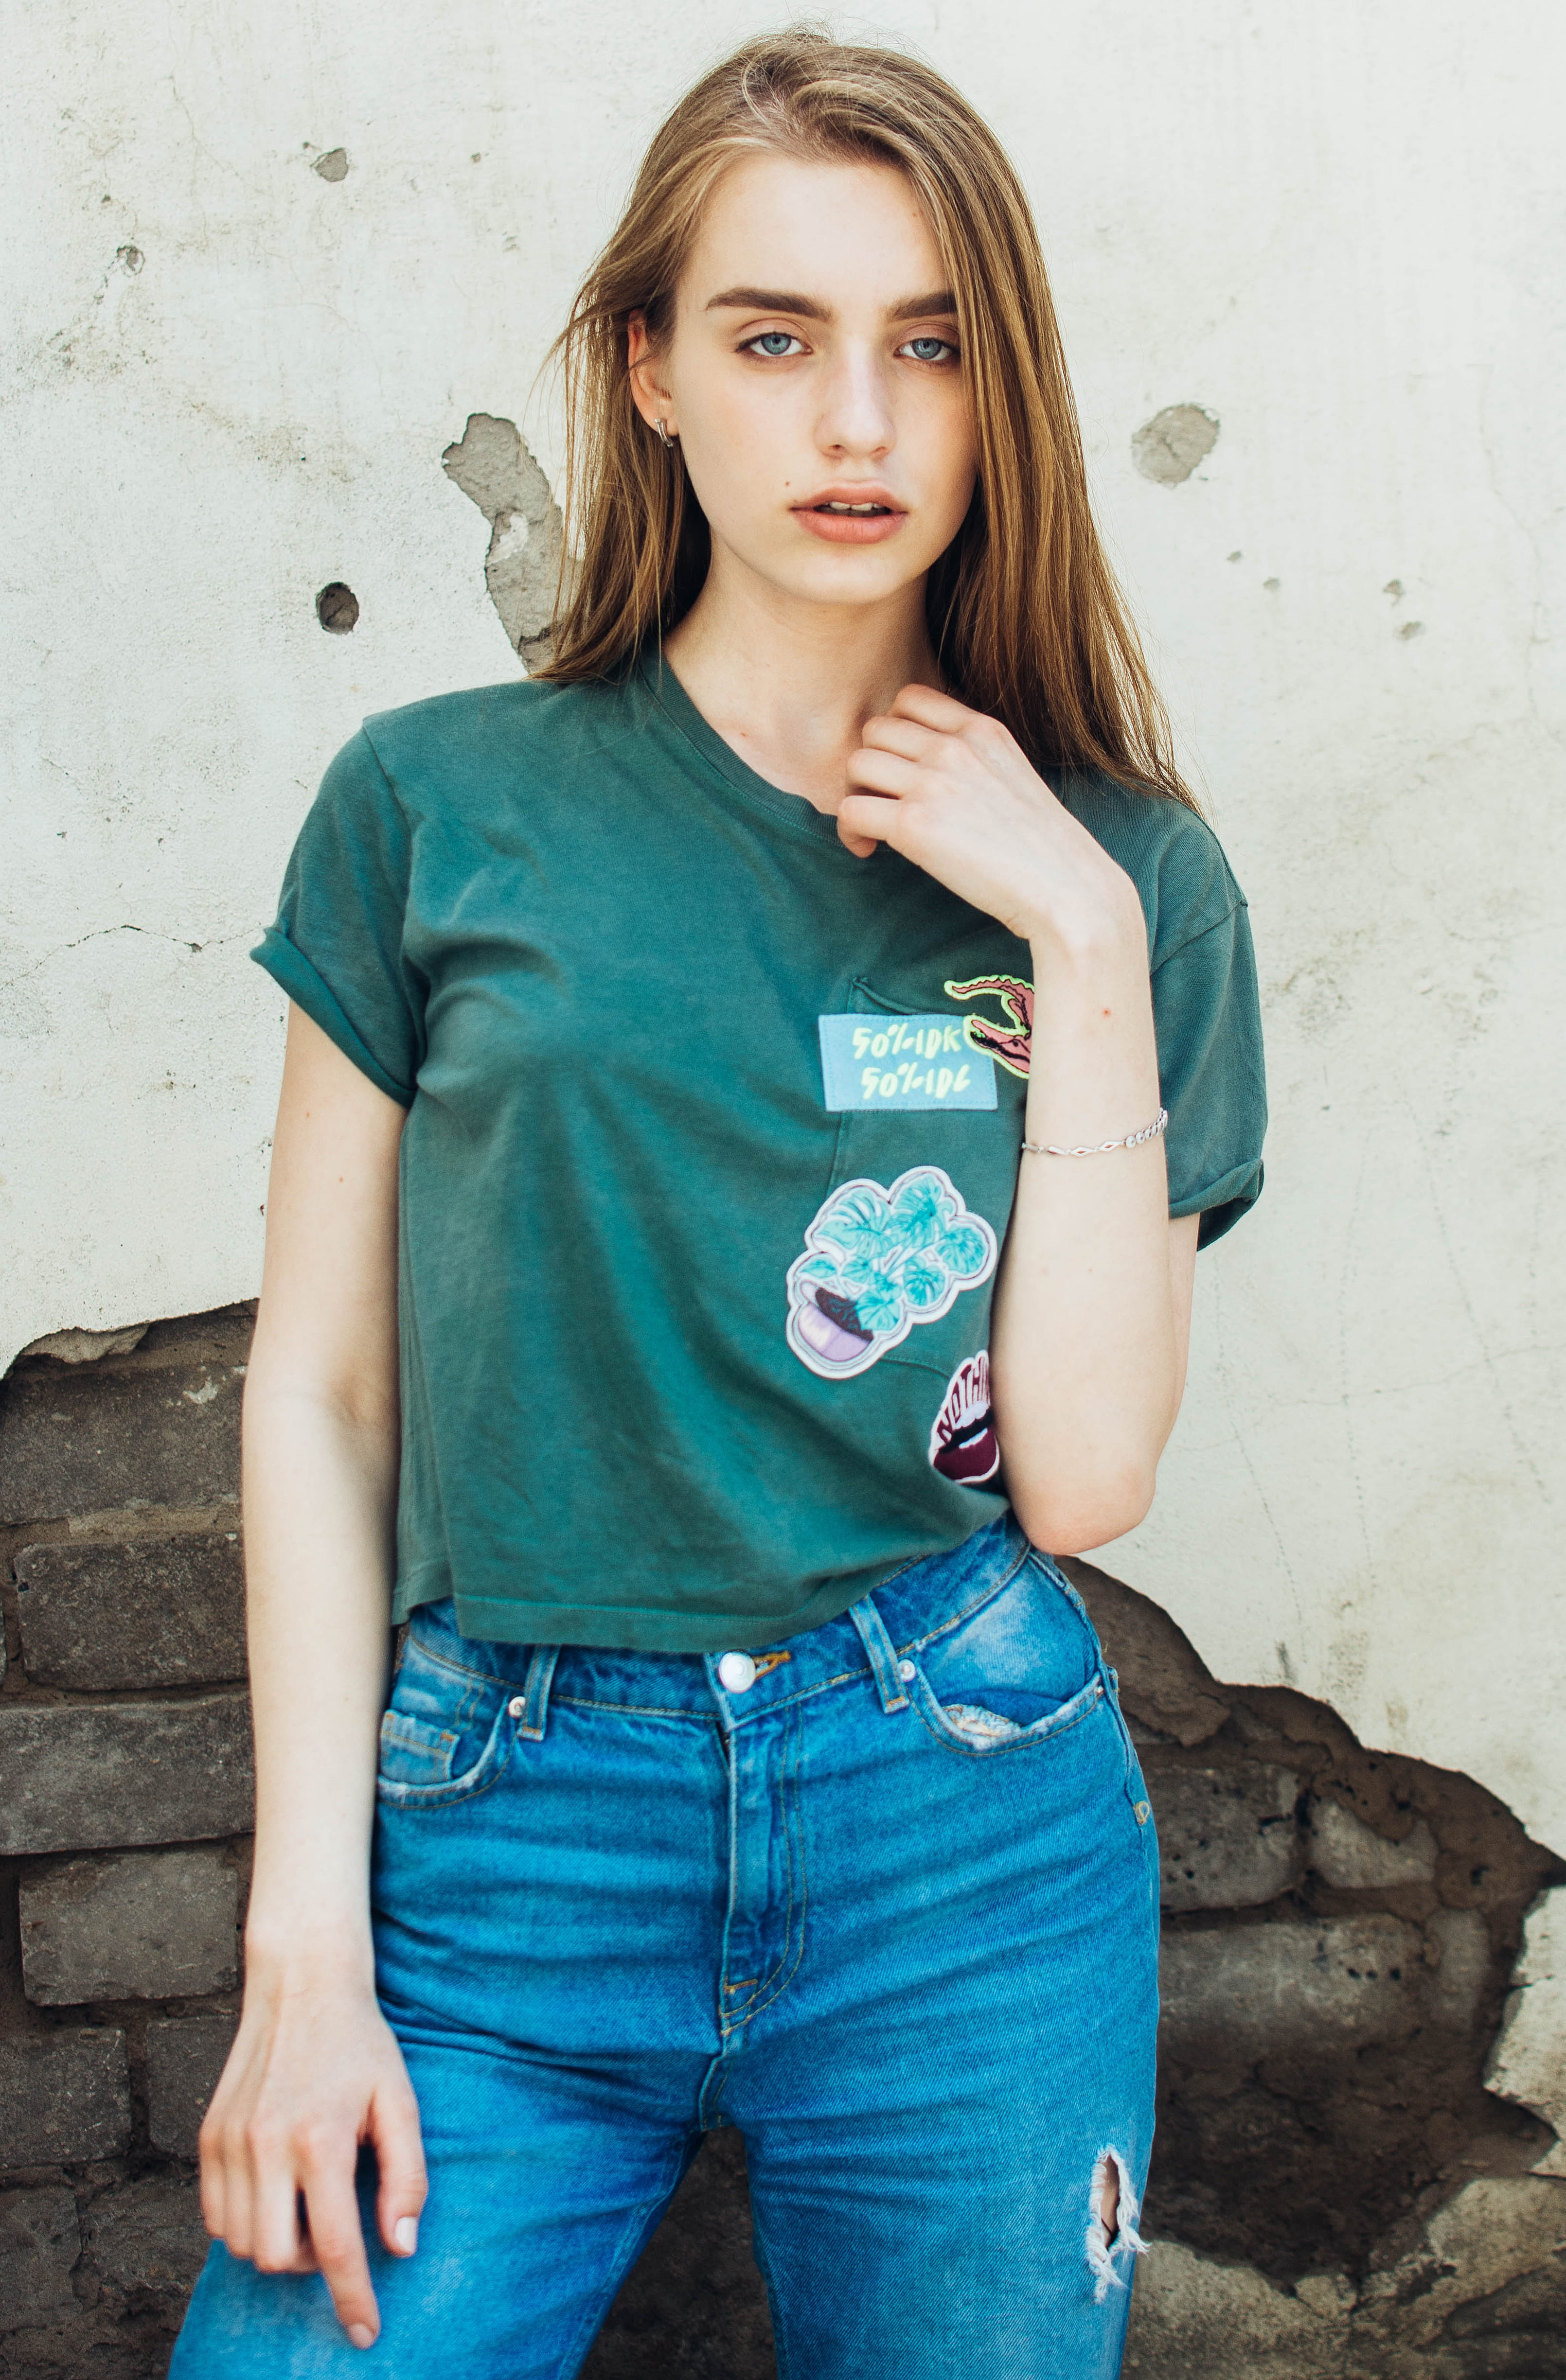 woman wearing green crew-neck t-shirt and blue jeans standing beside wall